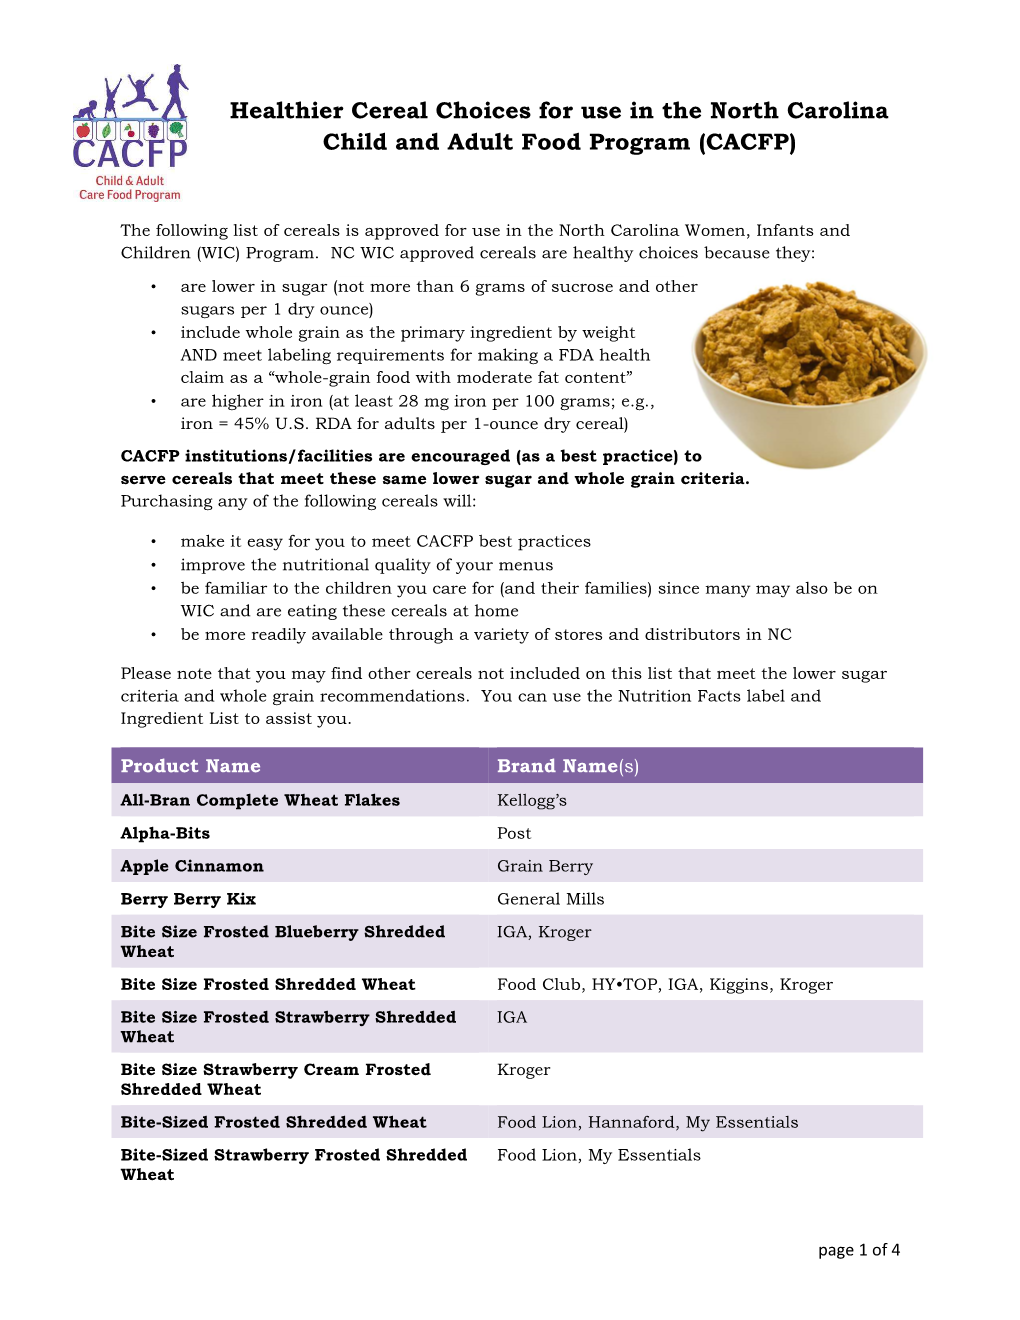 Healthier Cereal Choices for Use in CACFP